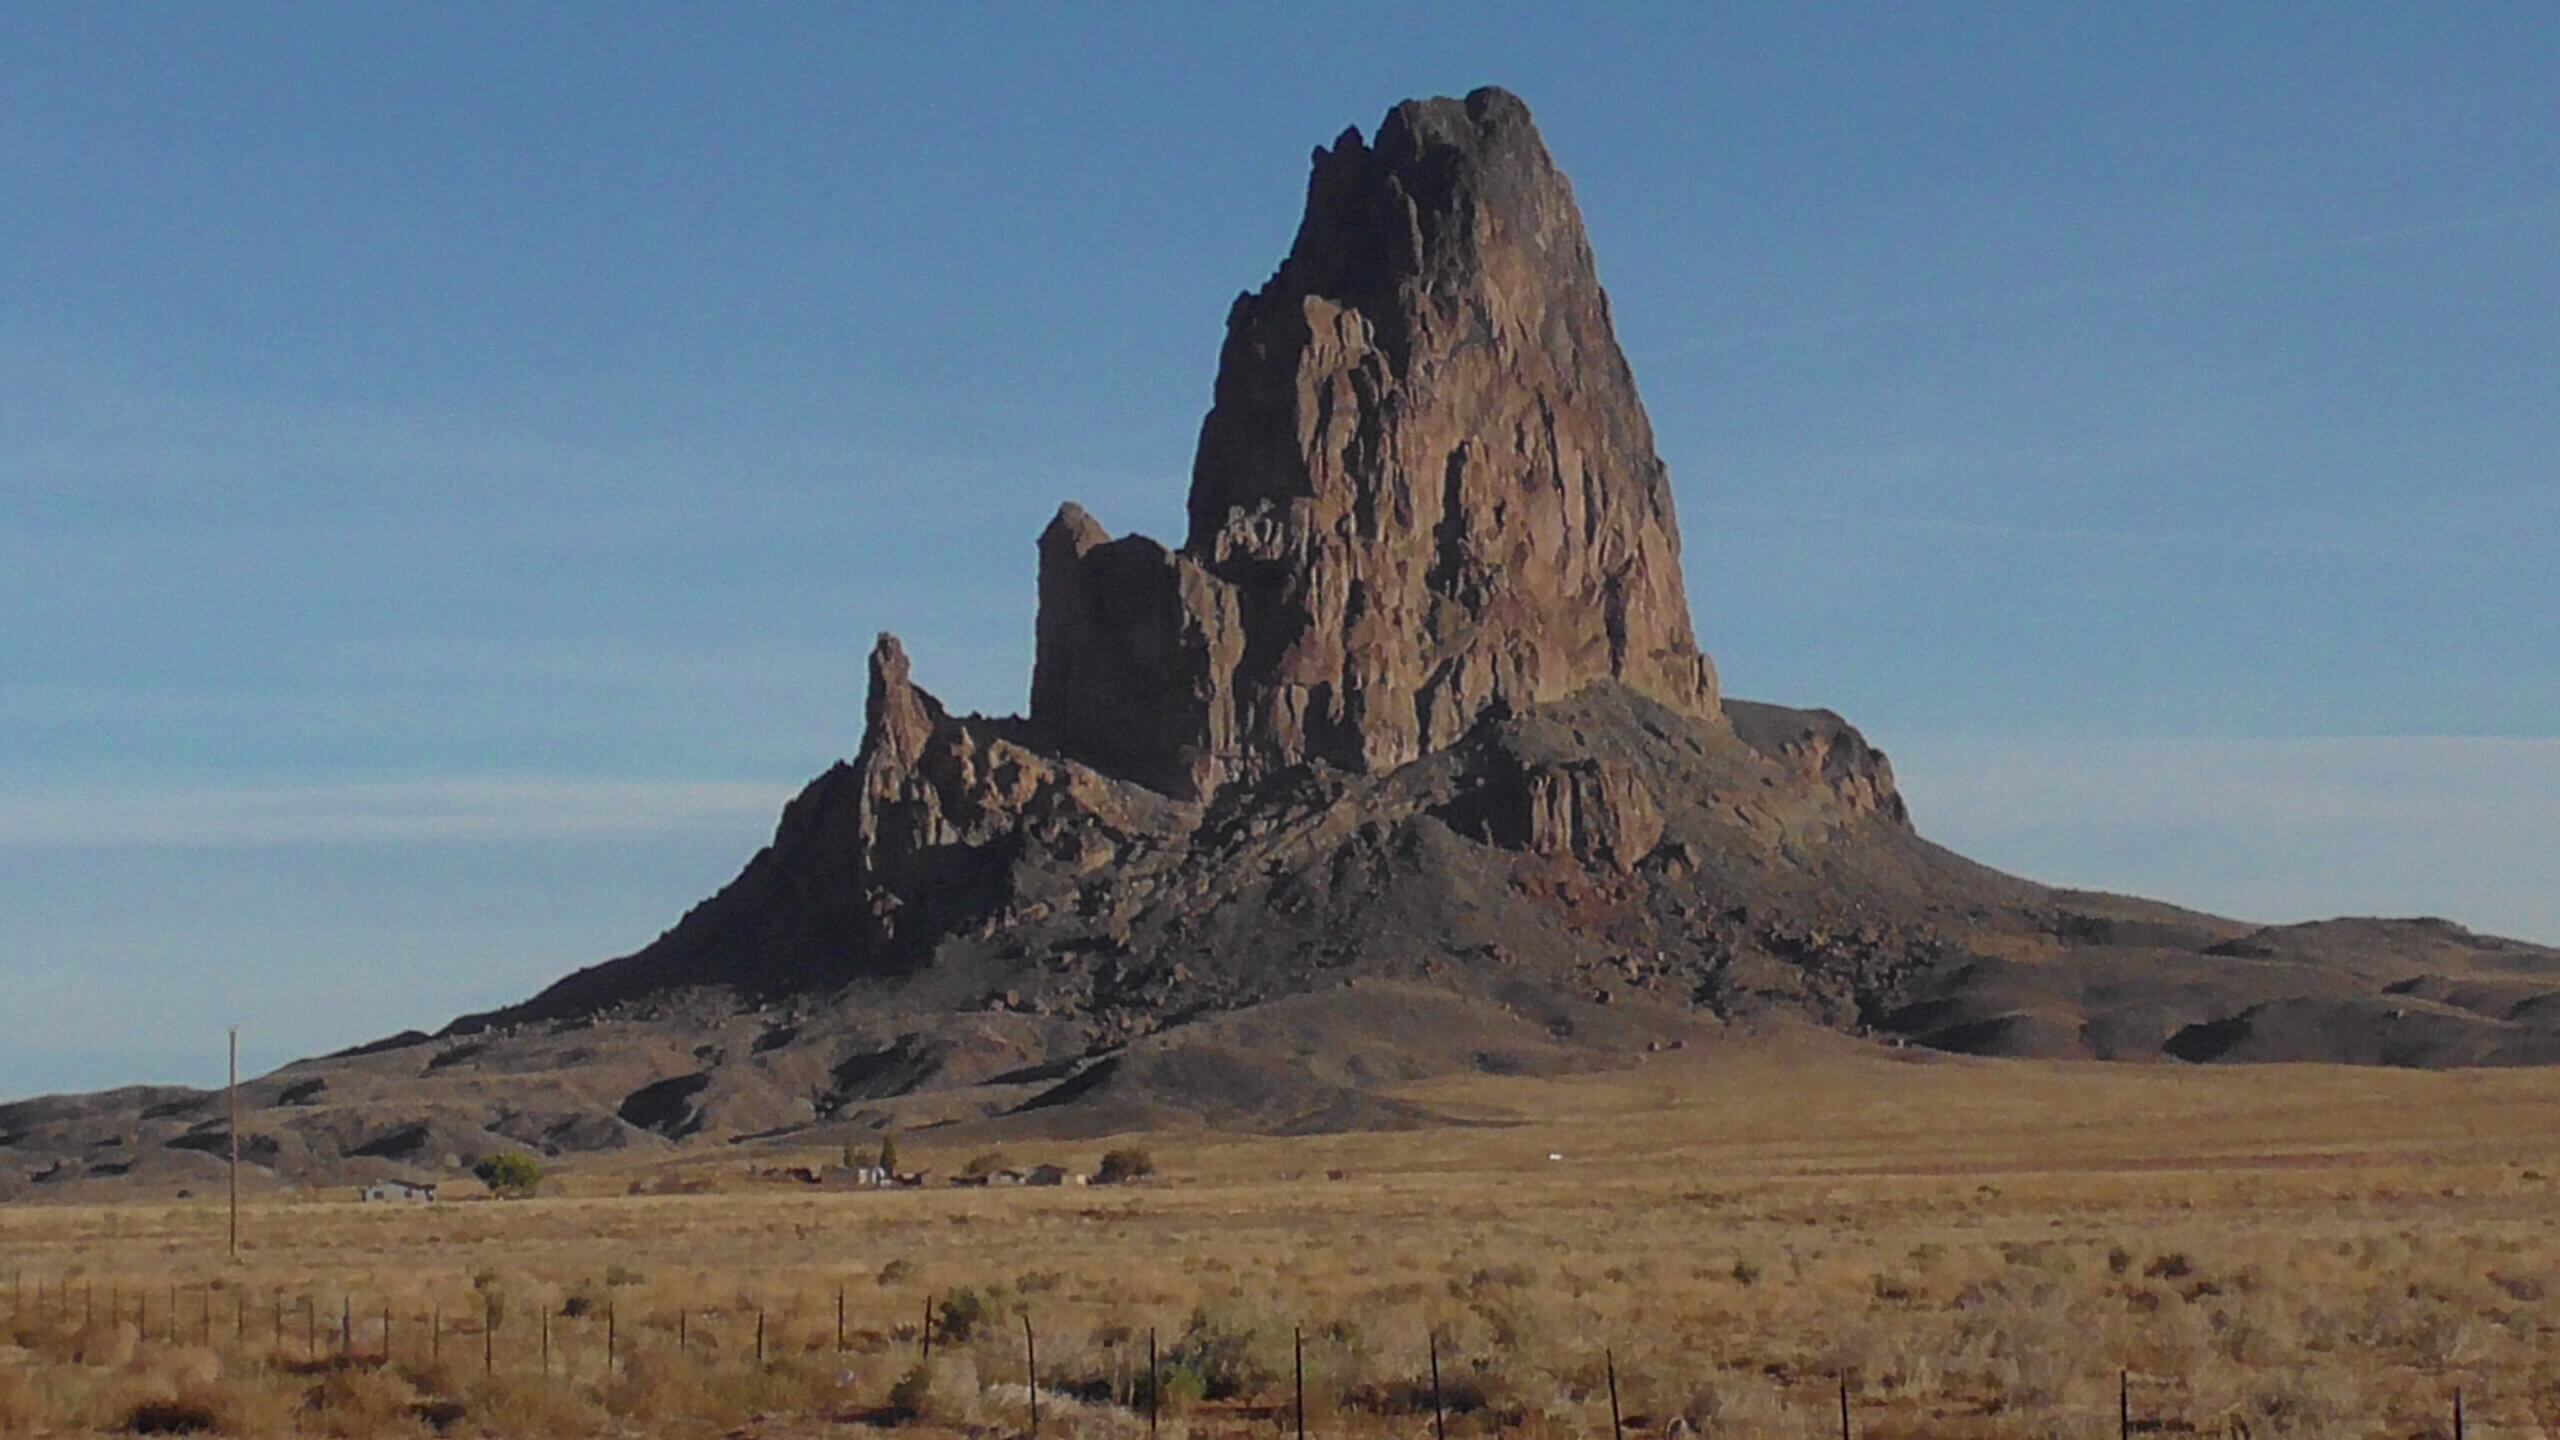 El Capitan on the way to Monument Valley